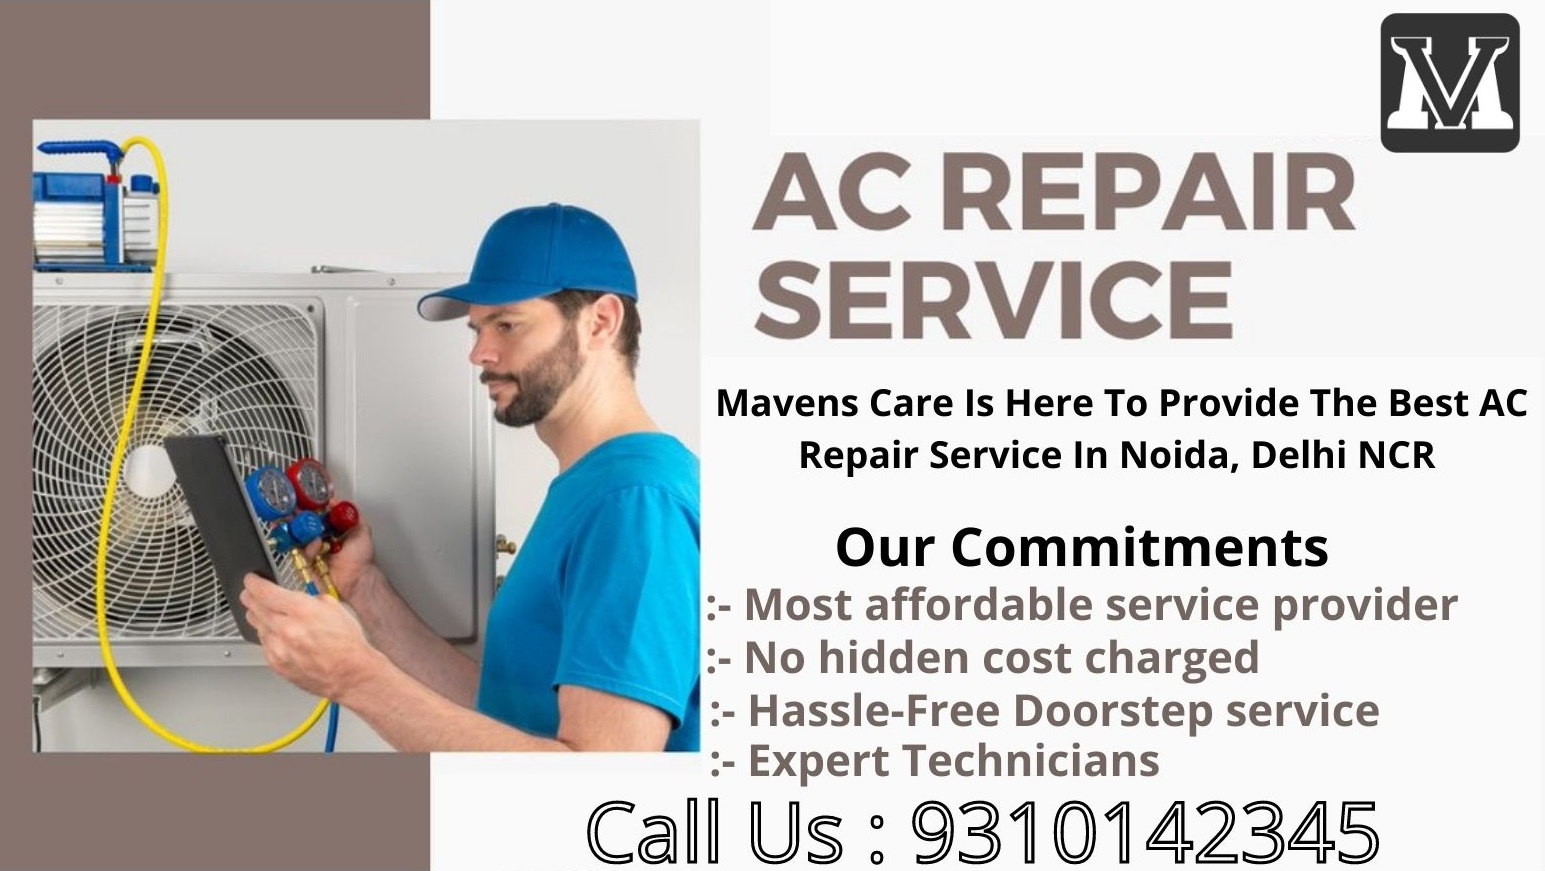 Professional And Affordable AC Repair In DelhiElectronics and AppliancesAir ConditionersSouth DelhiLajpat Nagar